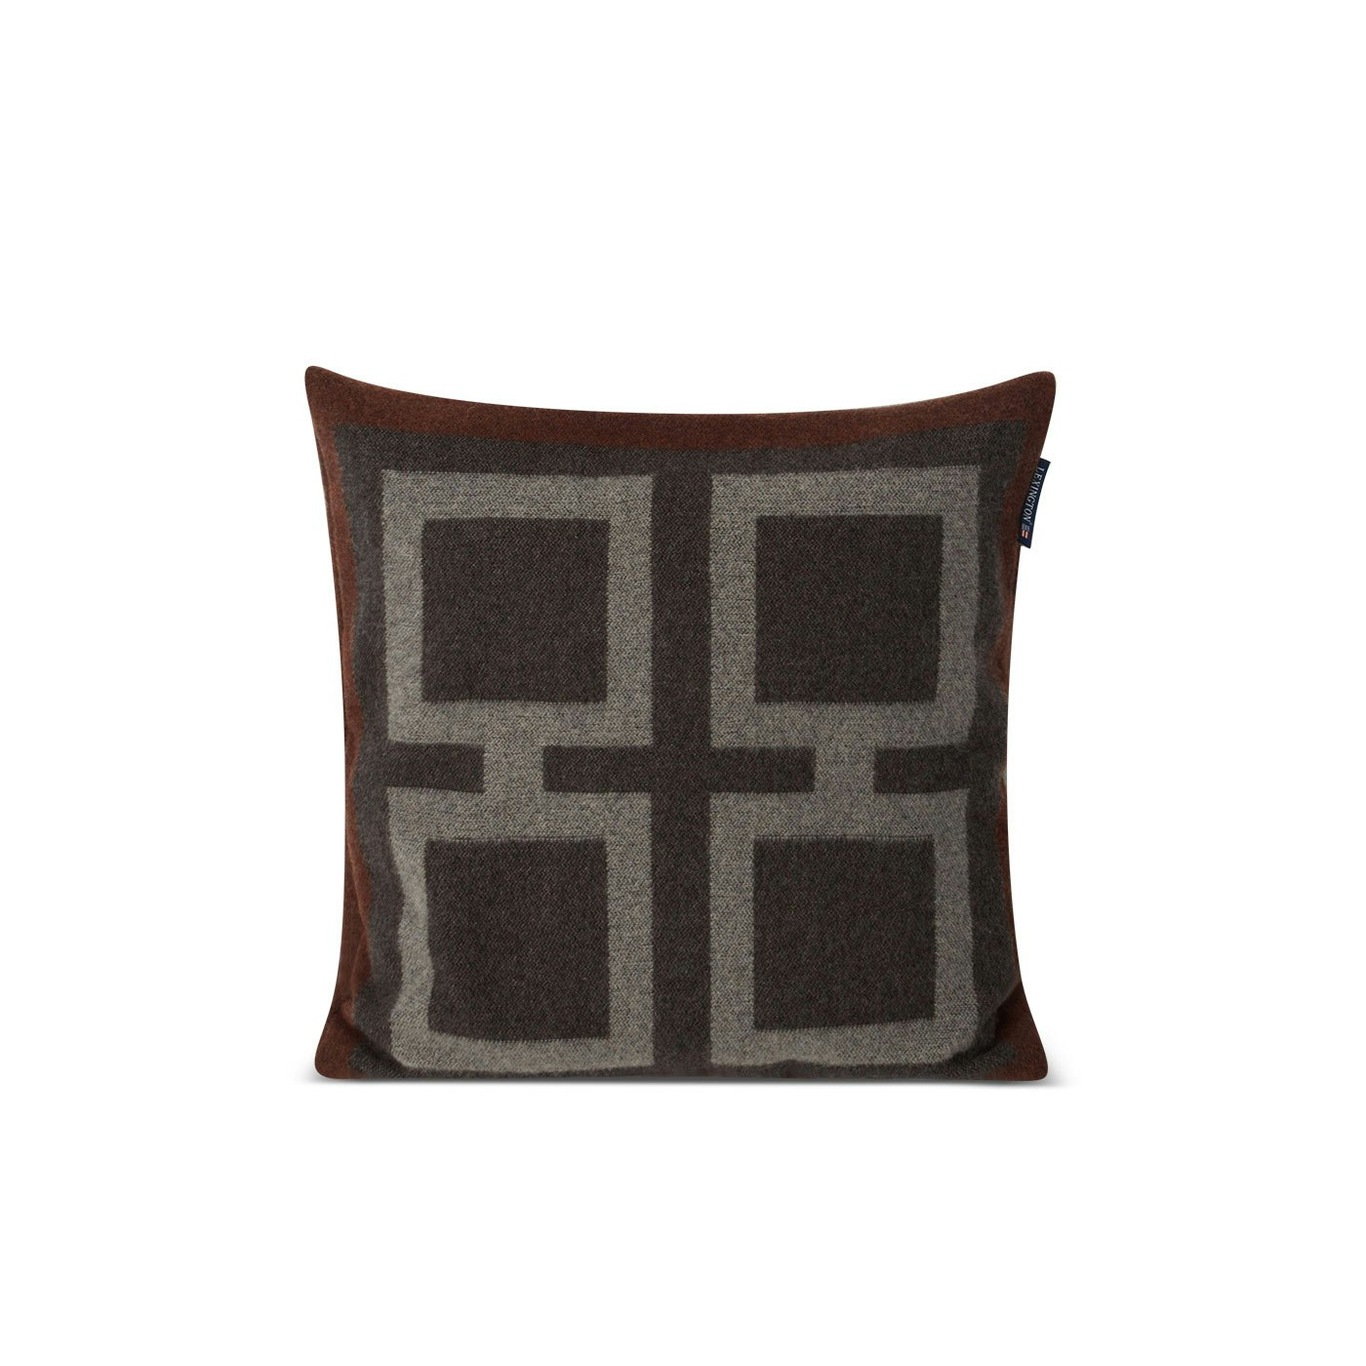 Graphic Recycled Wool Pillow Cover Pudebetræk 50x50 cm